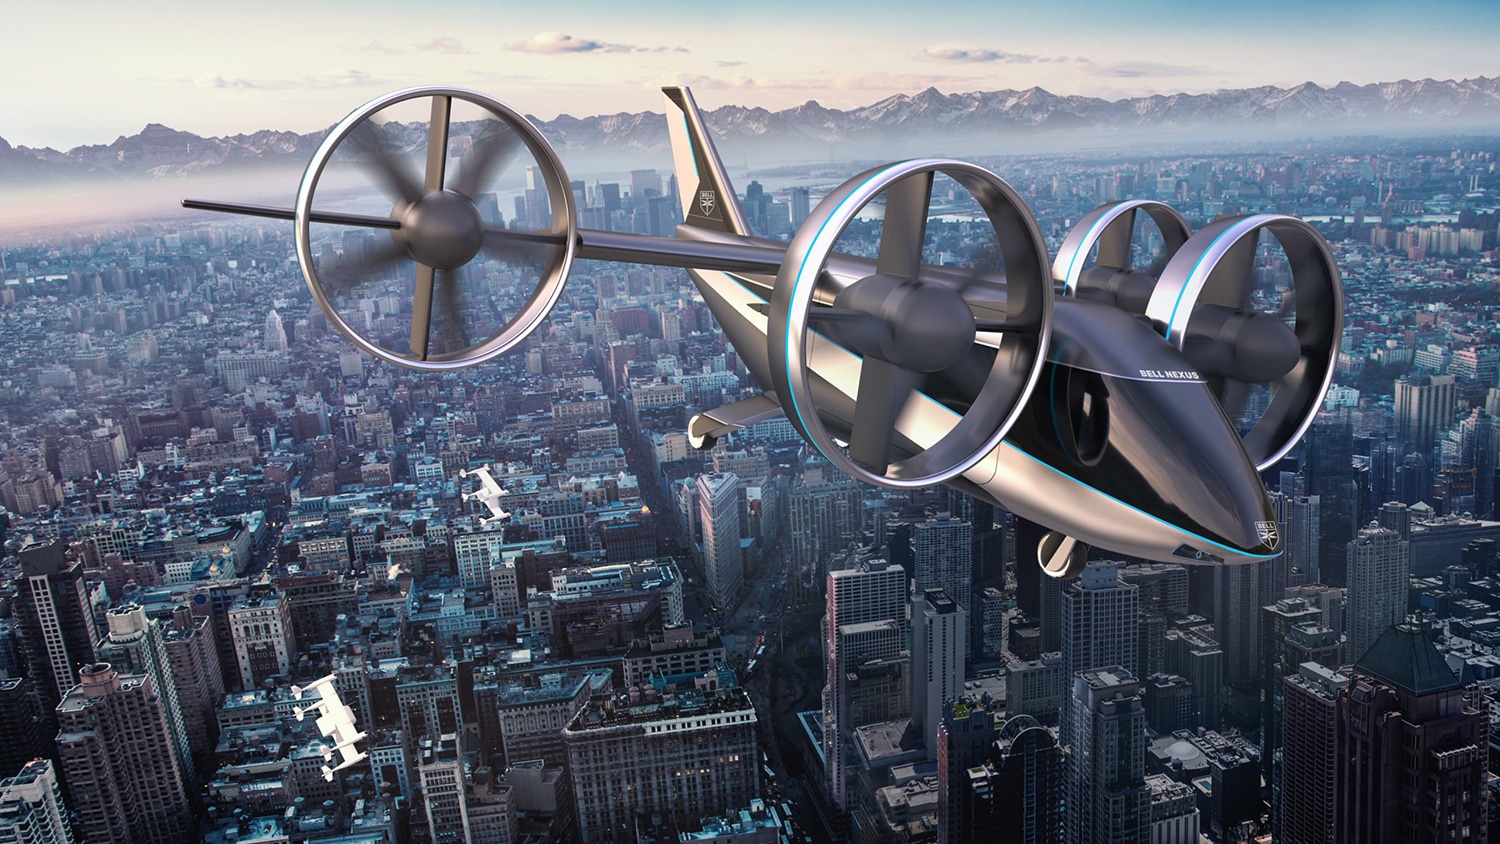 The latest Bell Nexus air taxi.